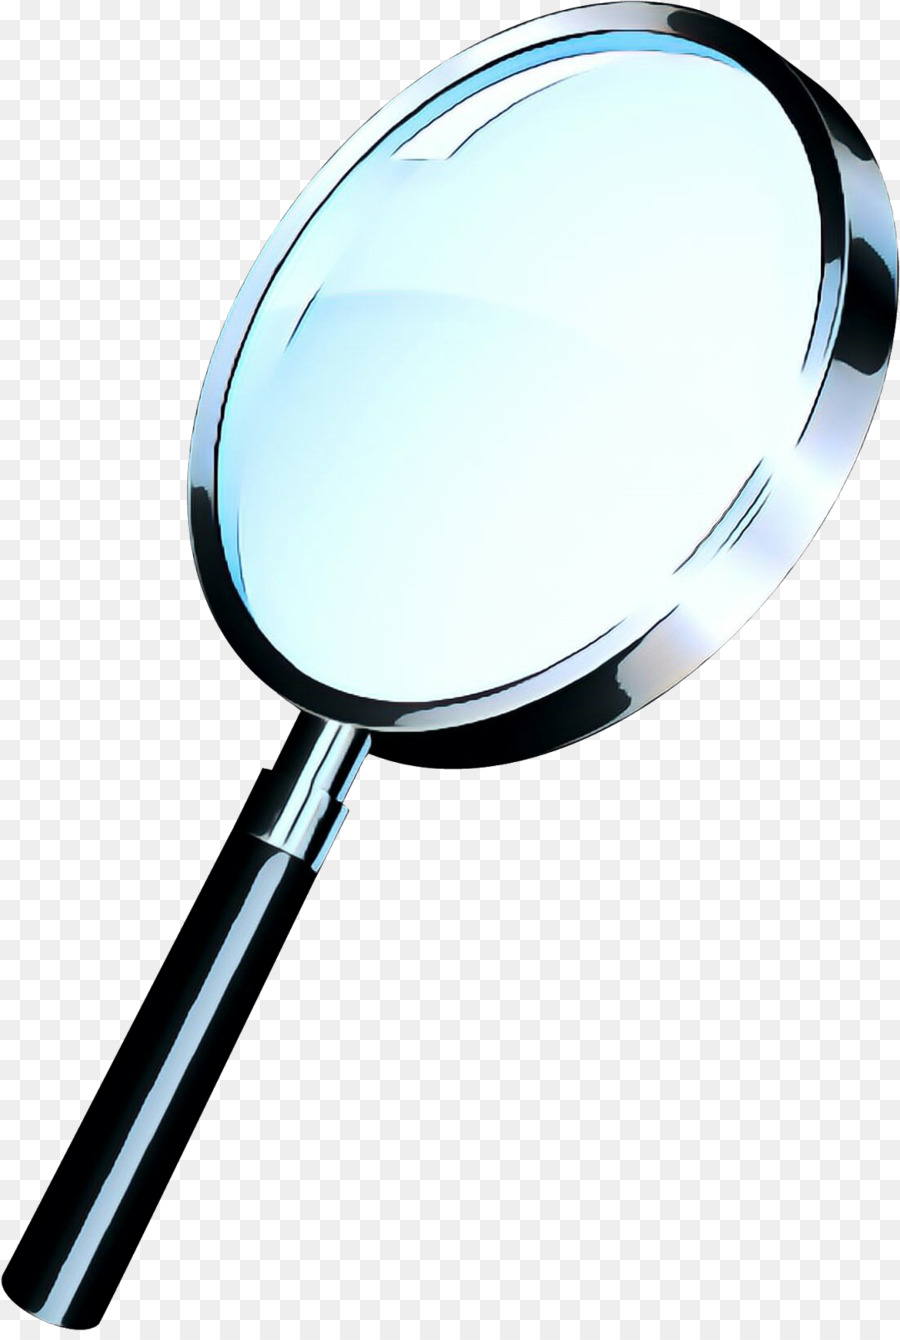 Magnifying Glass Clipart